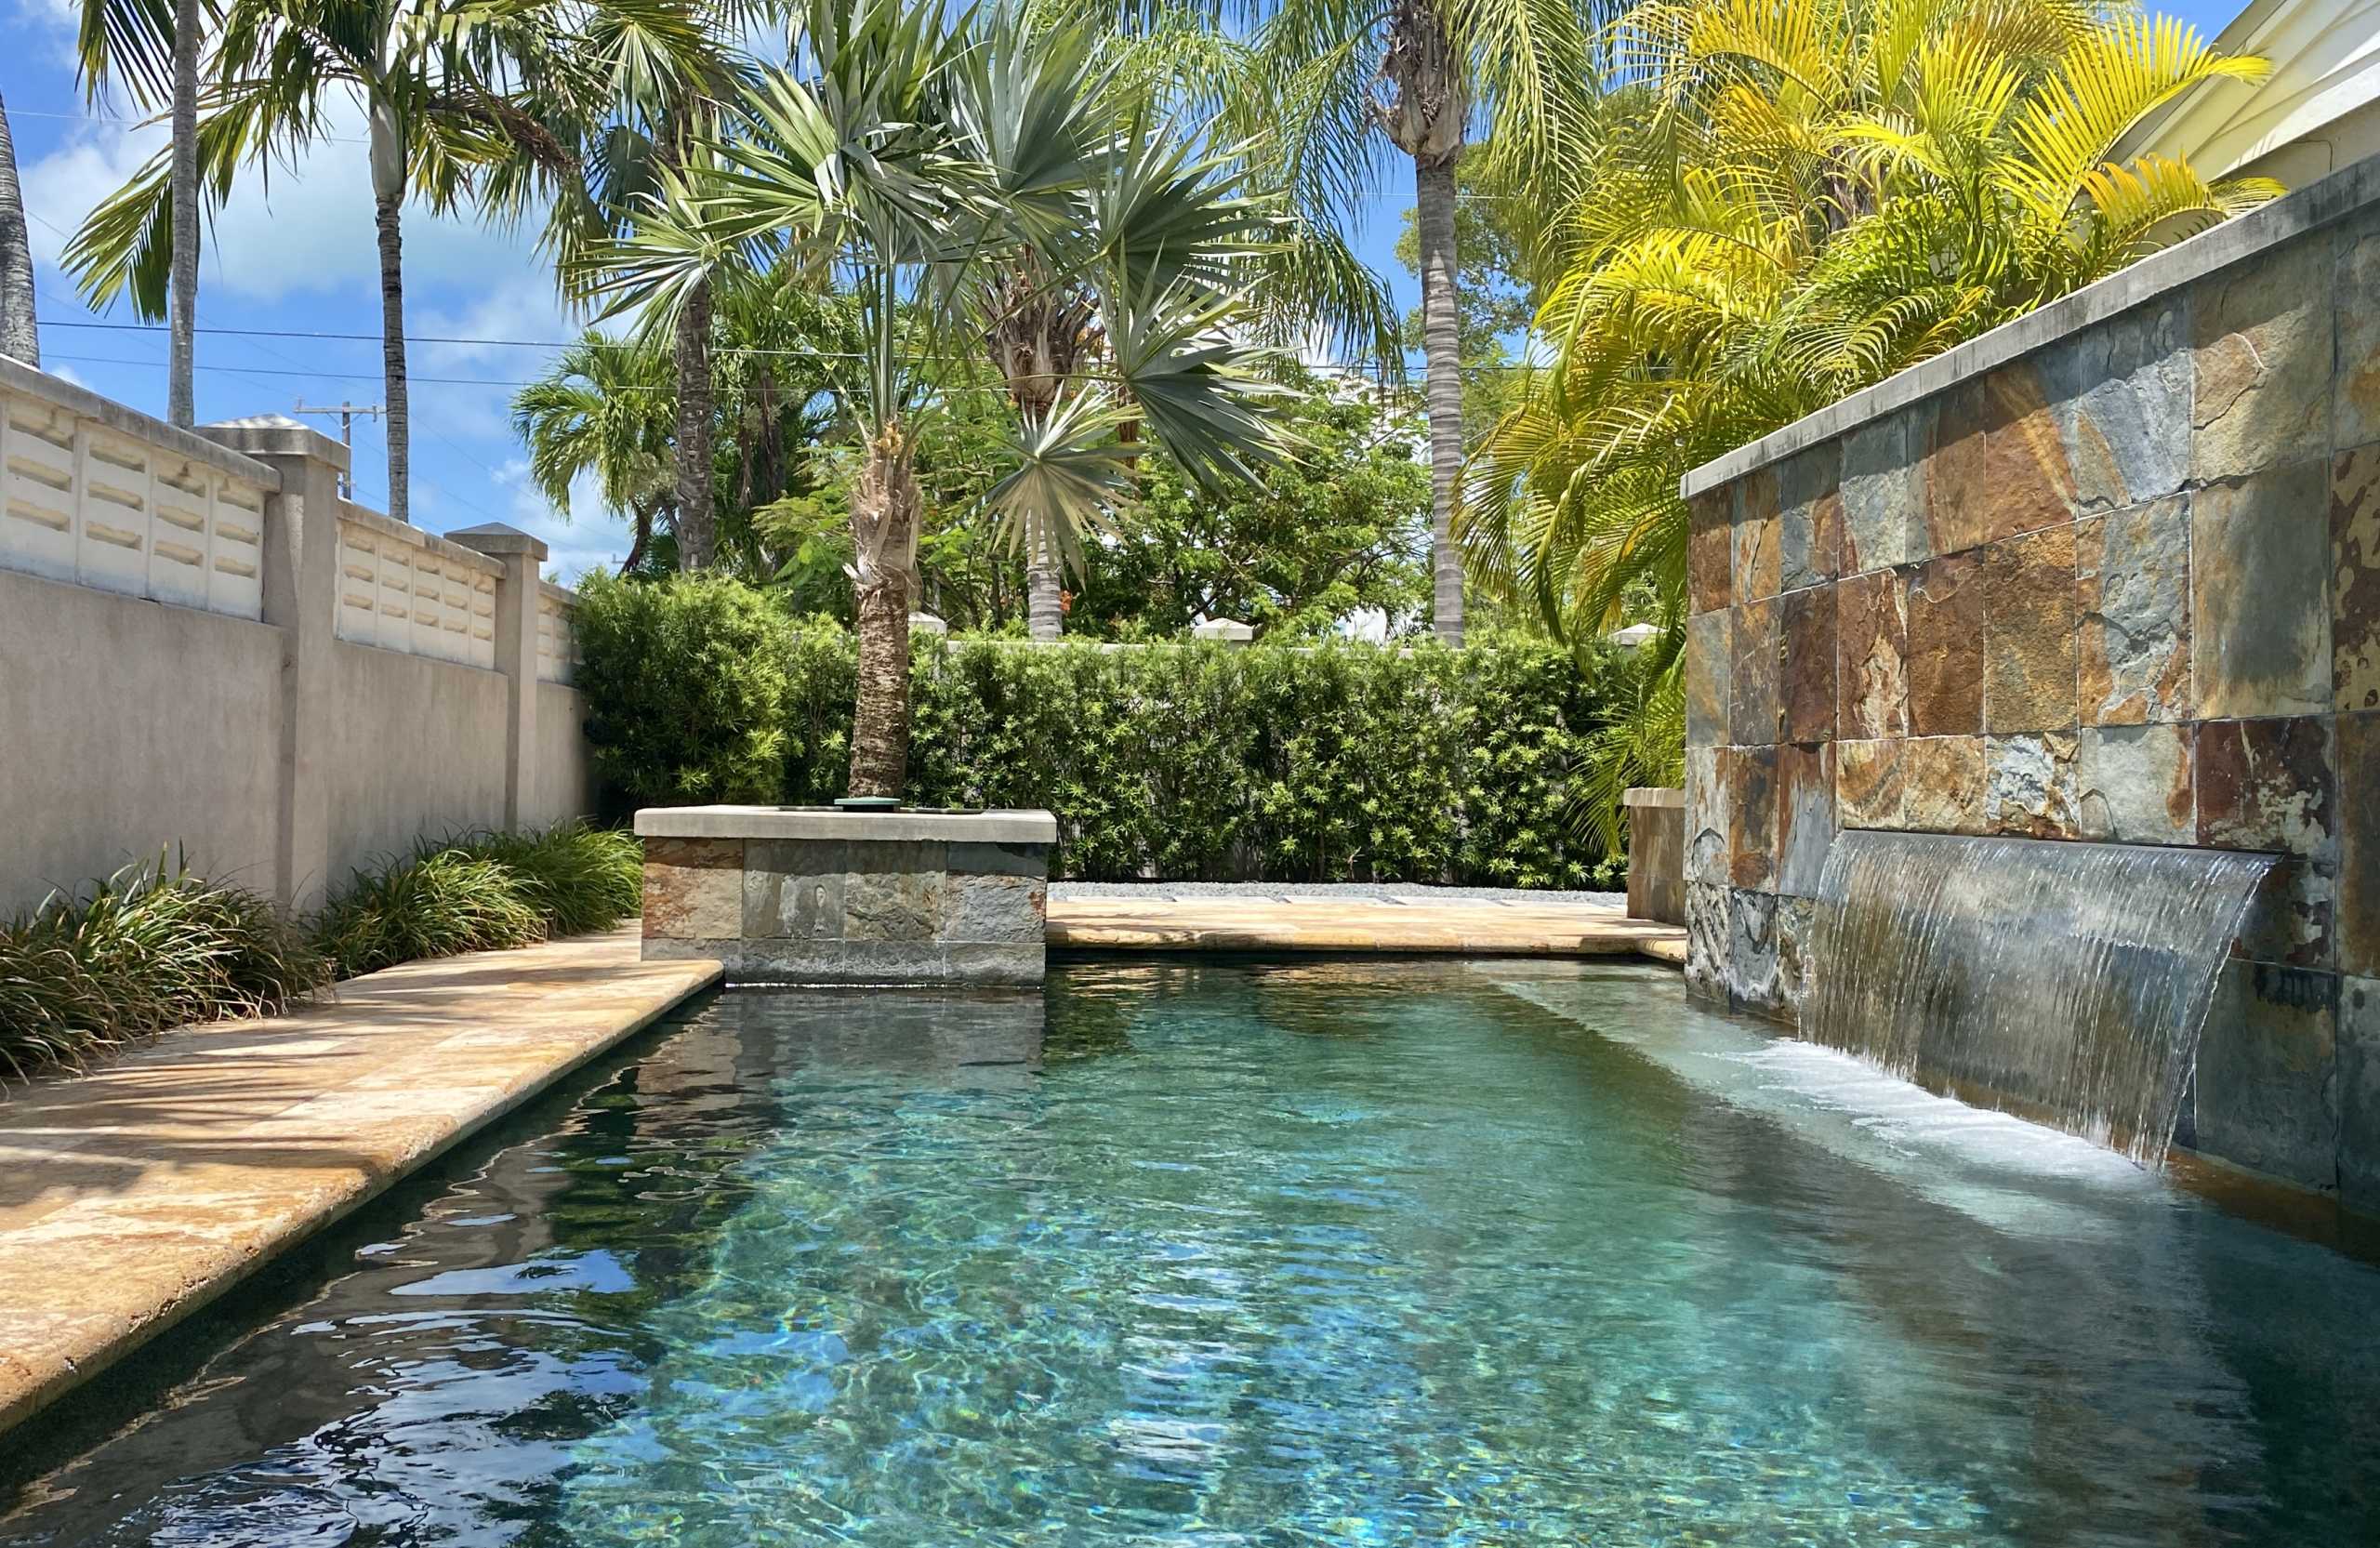 Mid Town Key West Dream Home - $1,940,000